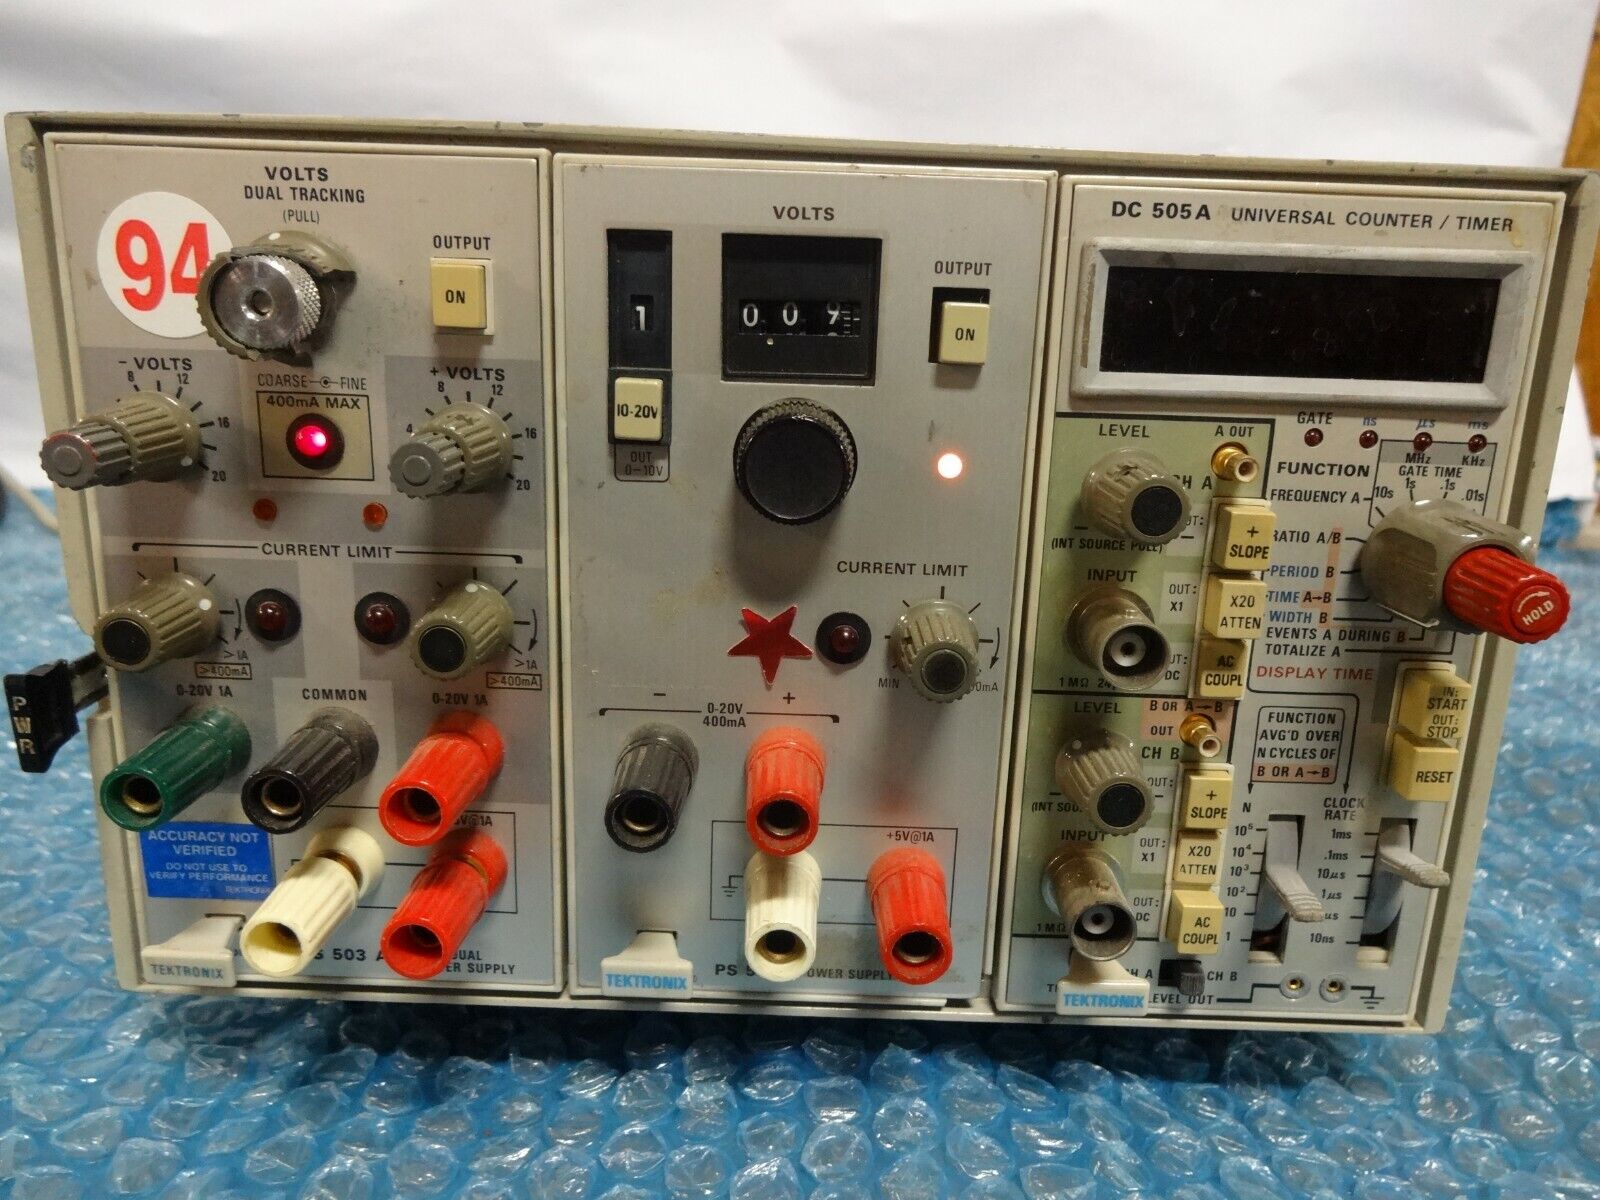 Tektronix TM 503 Power Module With PS503A,DC505A Universal Counter and PS501-1